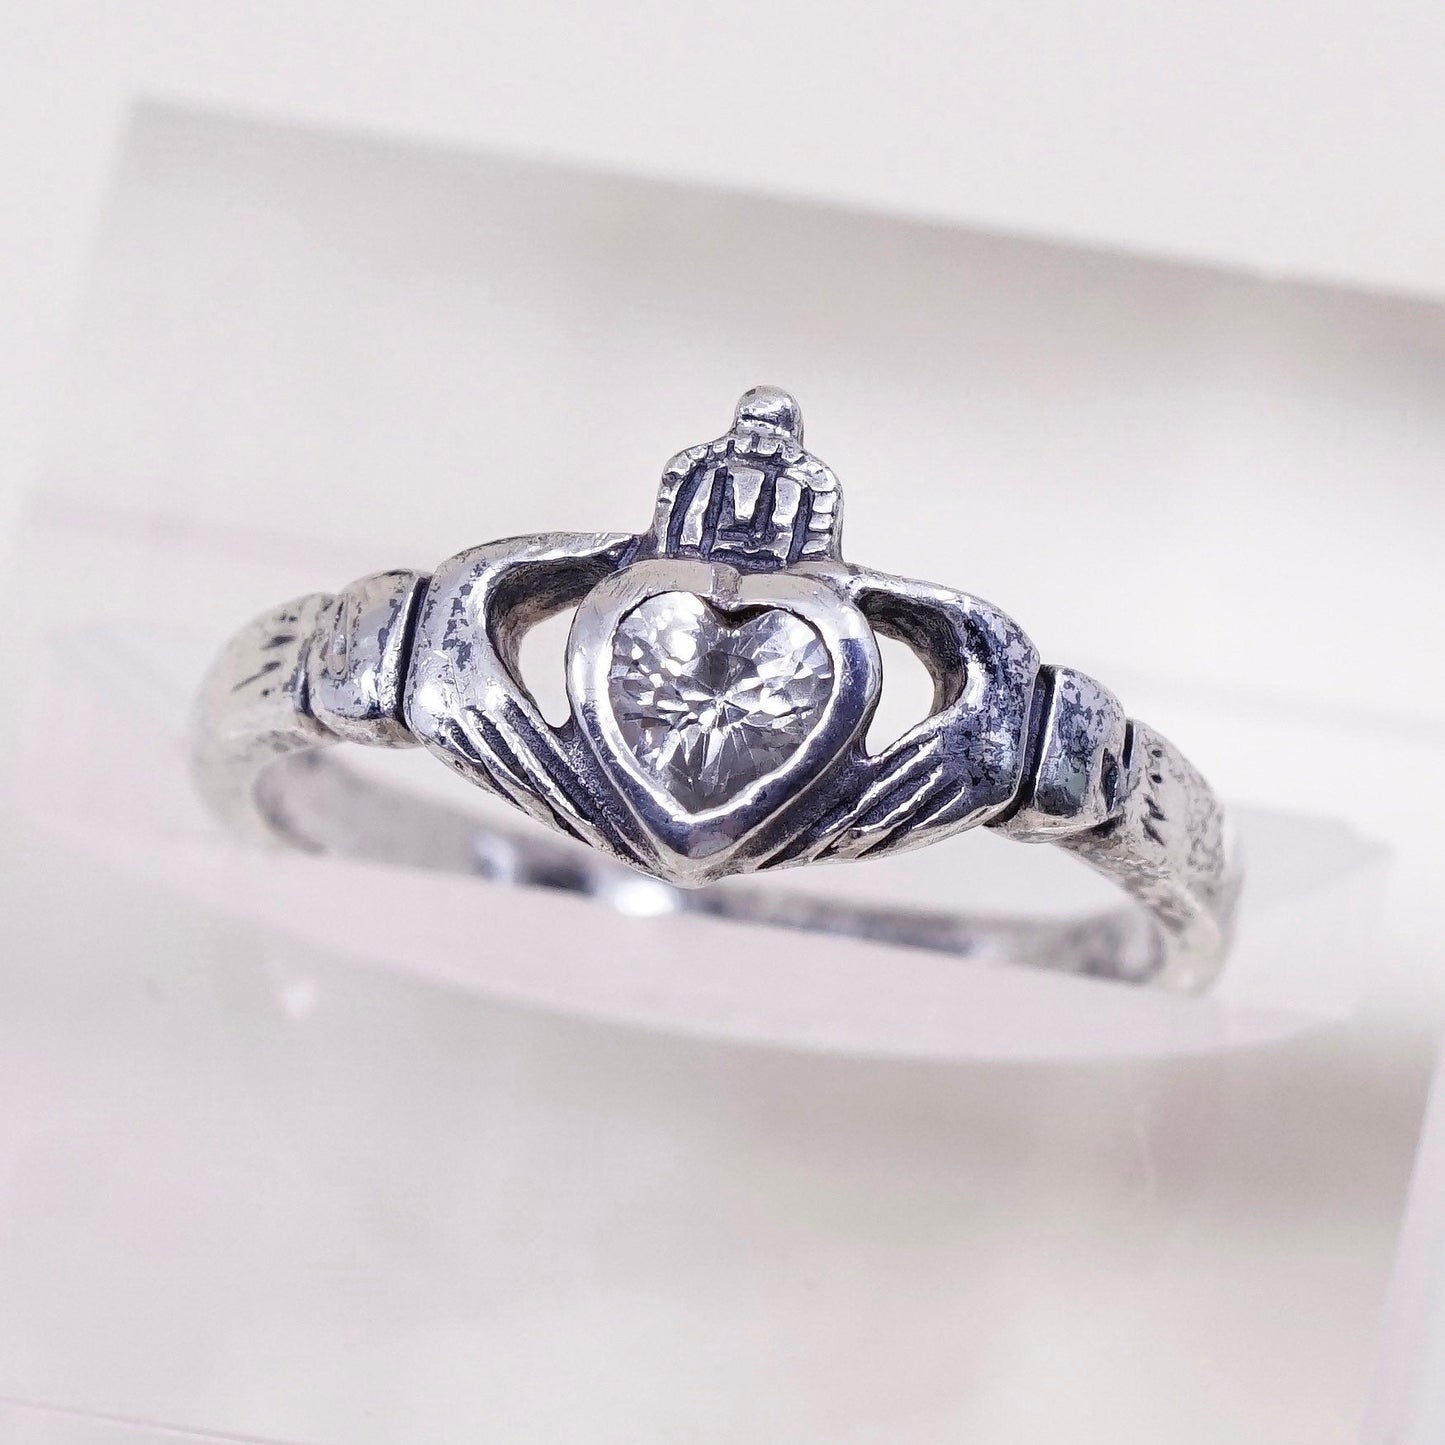 Size 7.25, Vintage sterling 925 silver claddagh ring, holding Cz heart band